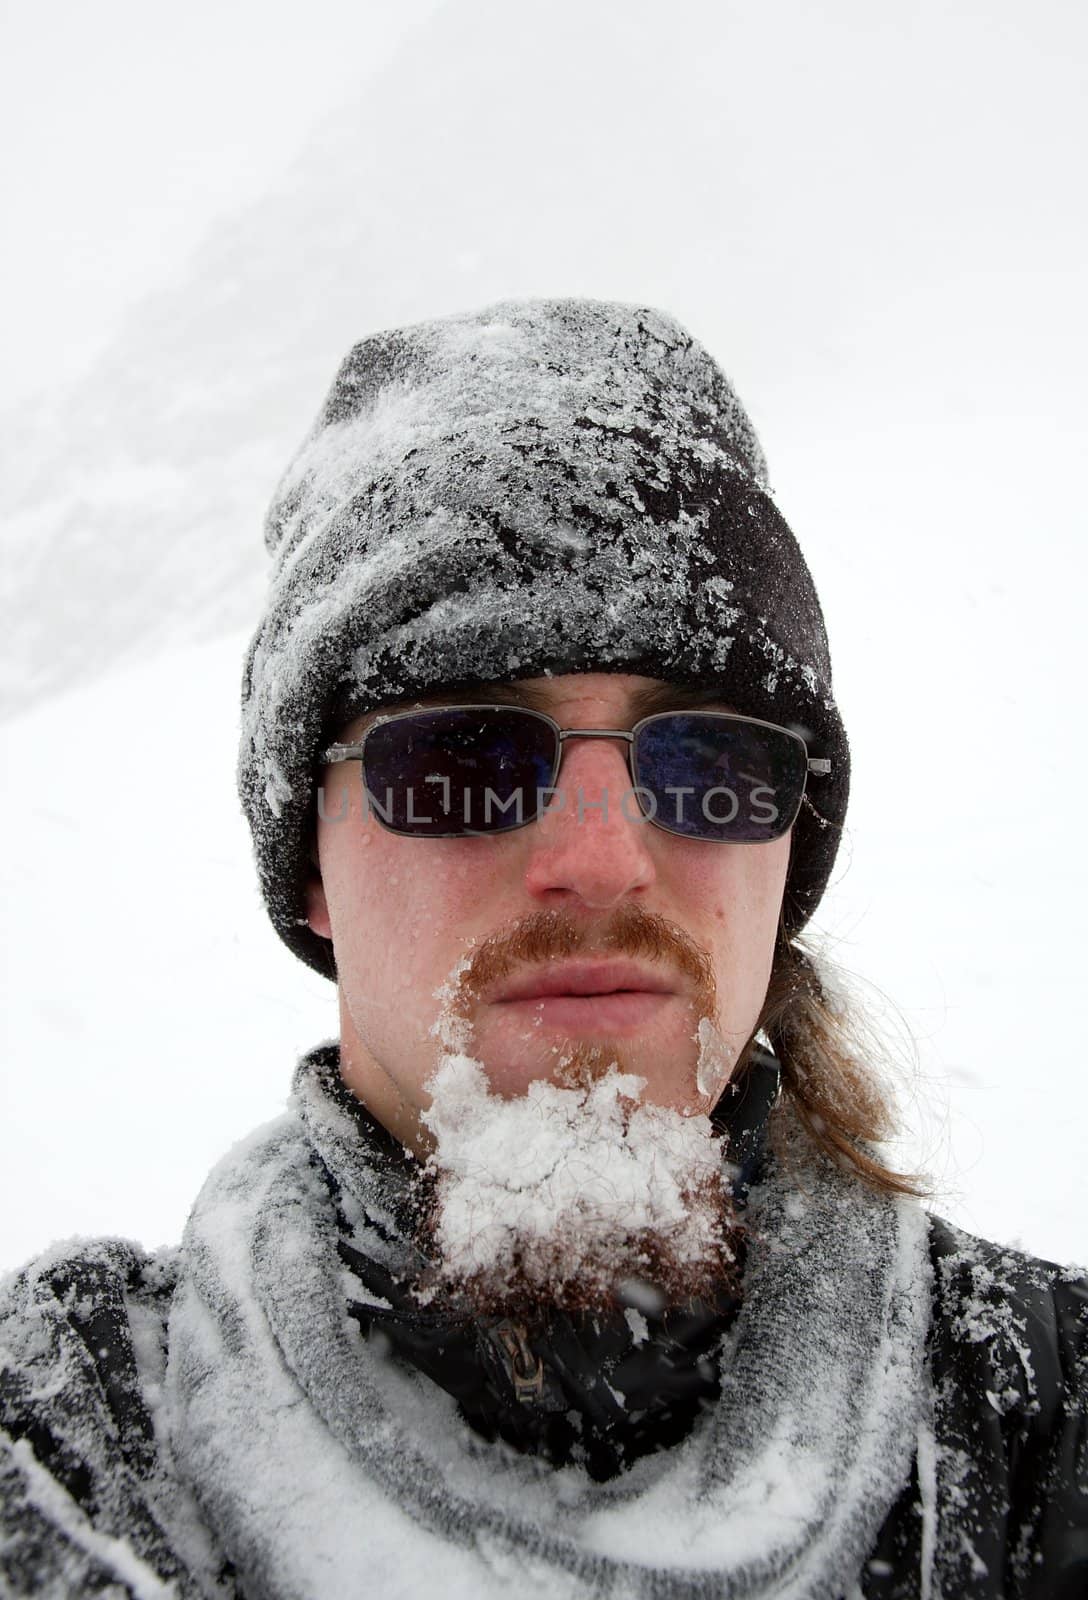 Portrait of a bearded man cover by snow in a blizzard